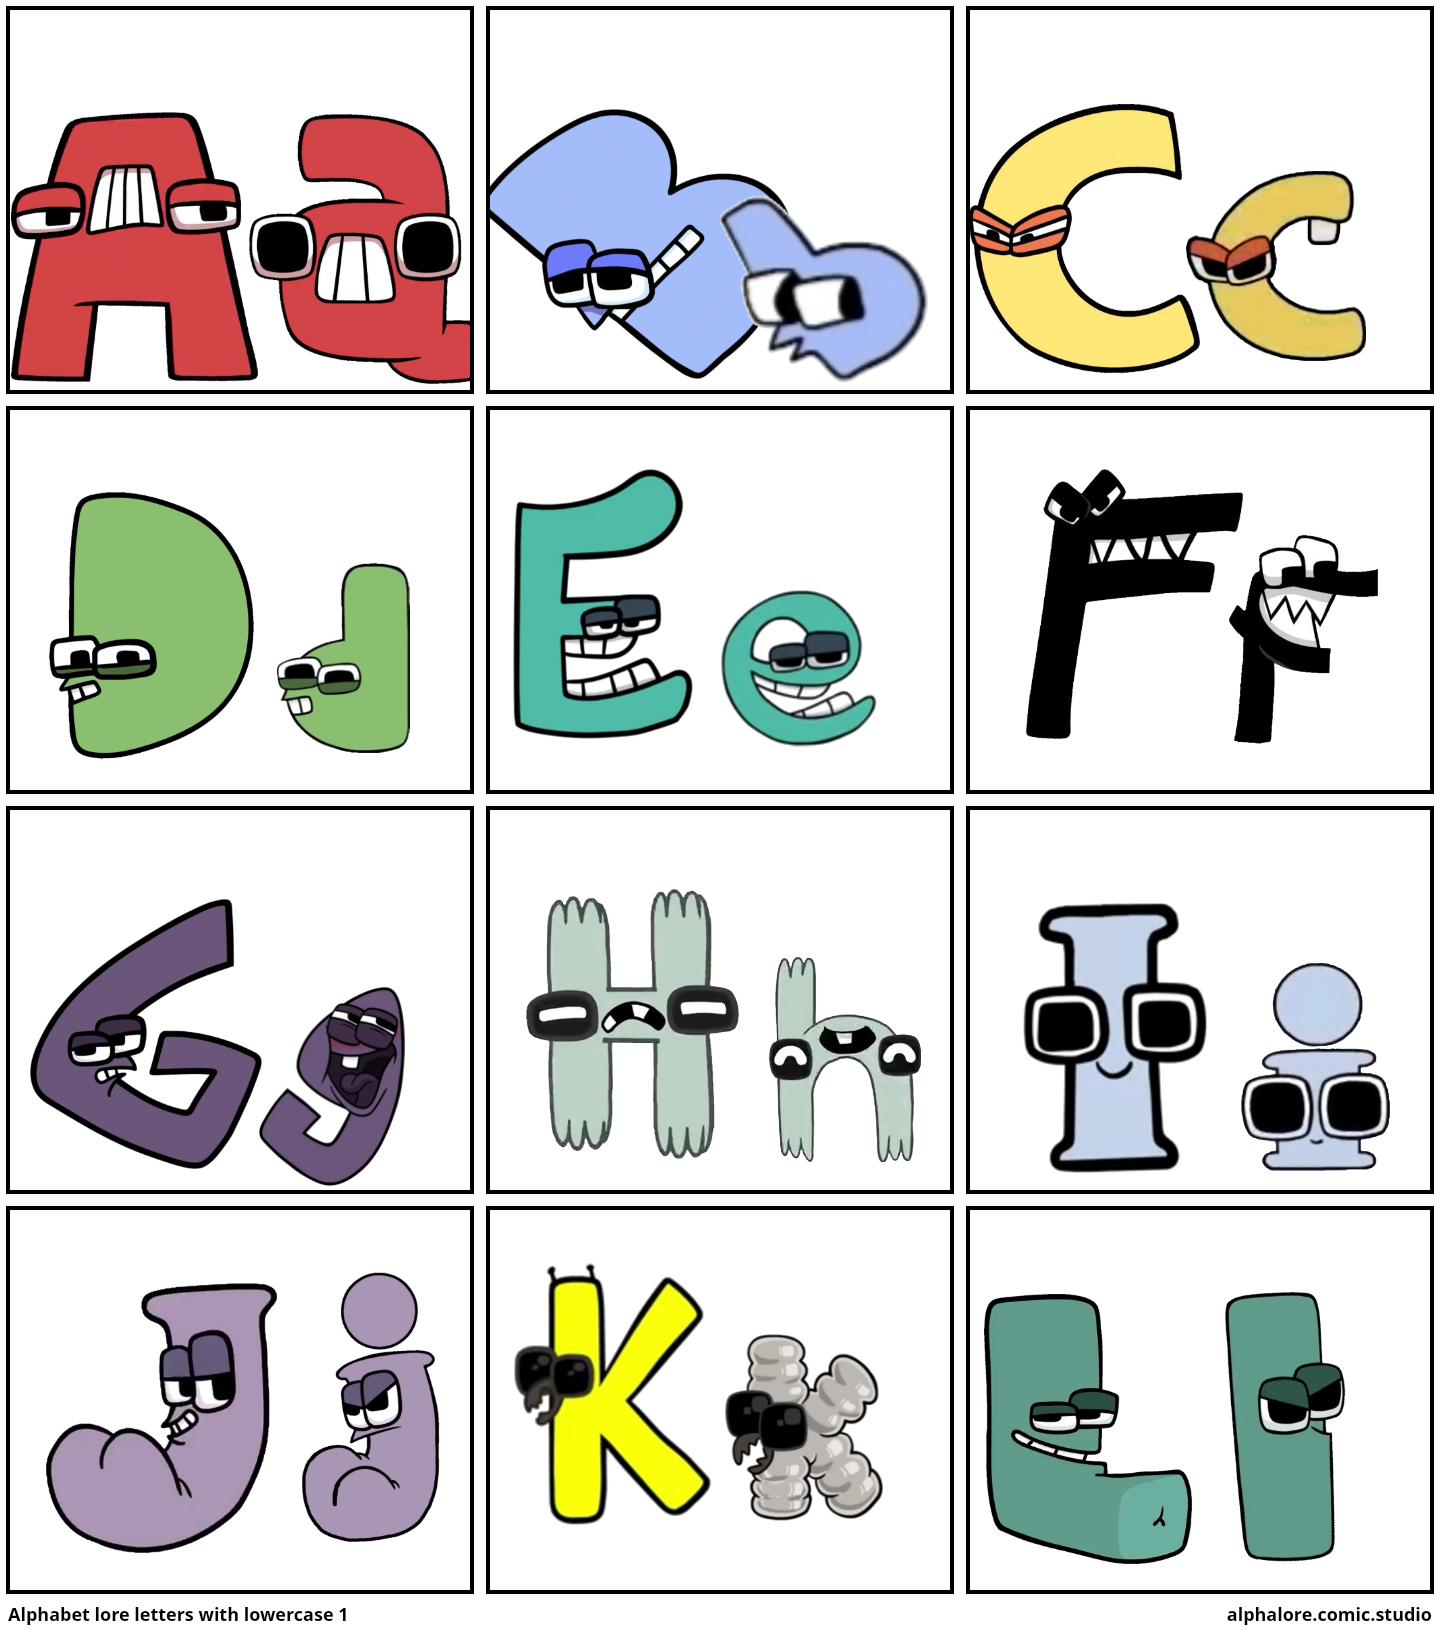 This is what would if the lowercase alphabet lore letters get